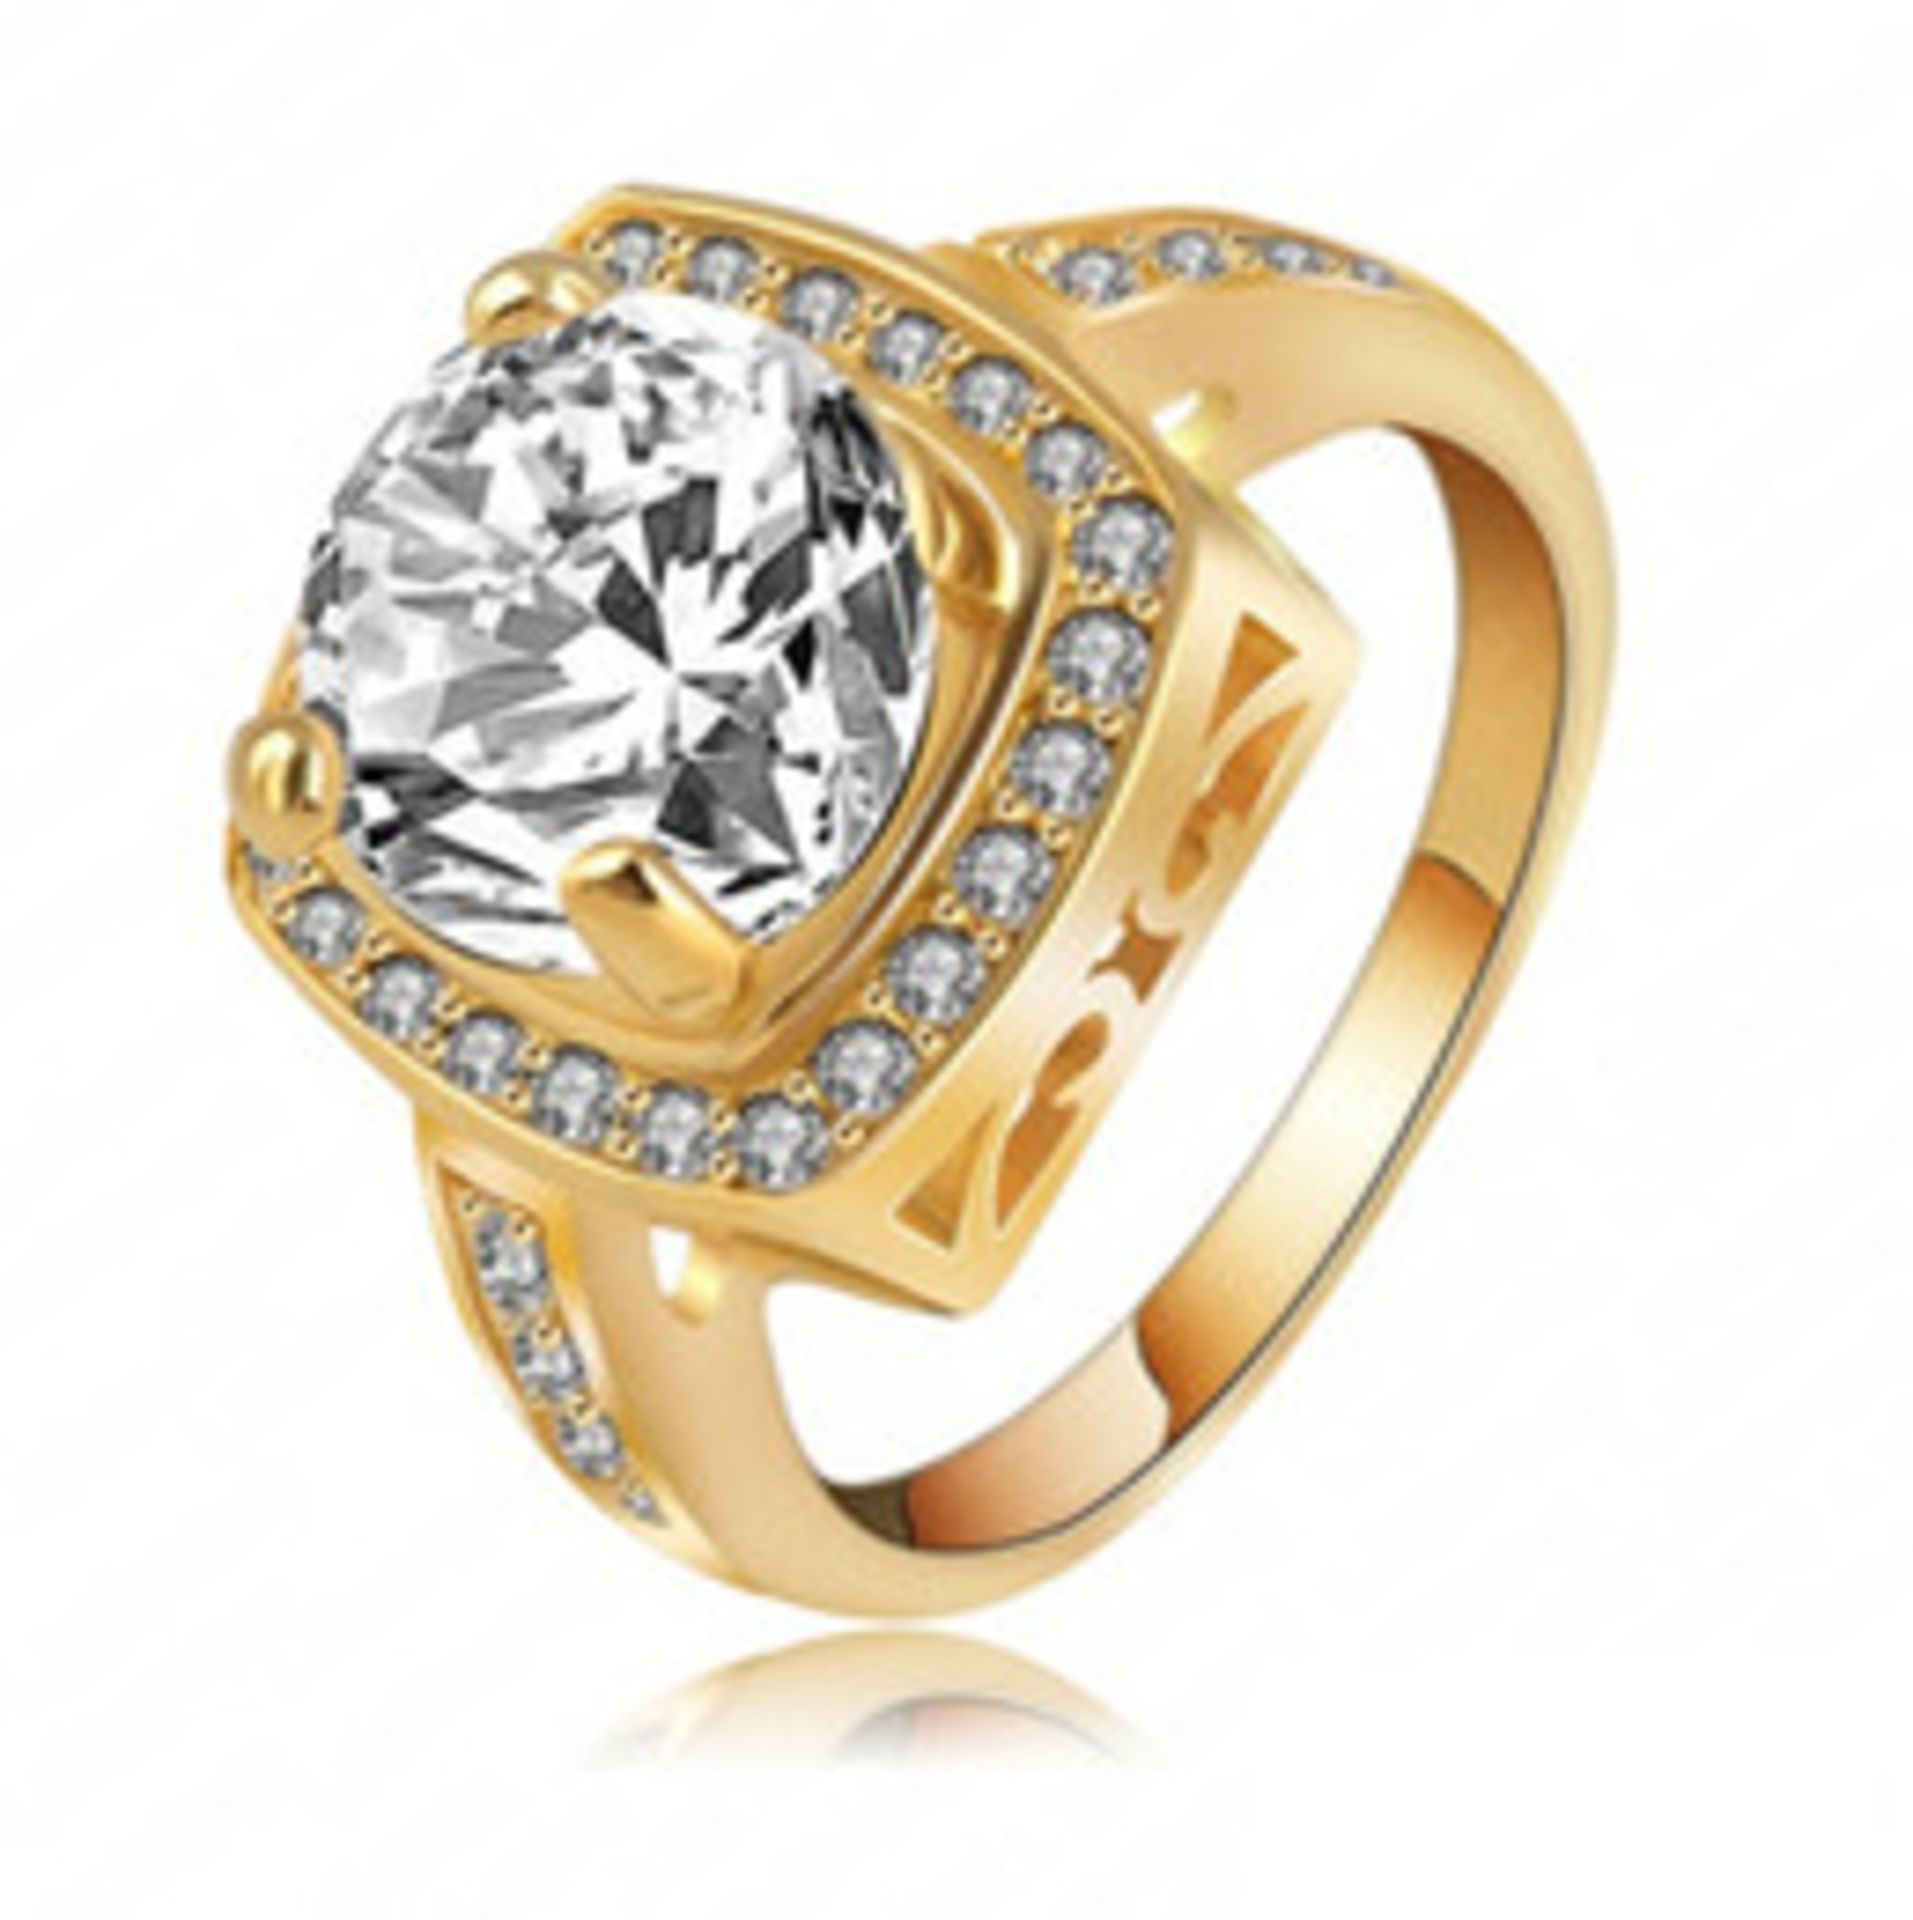 + VAT Brand New Gold Plated Square Crystal Ladies Ring